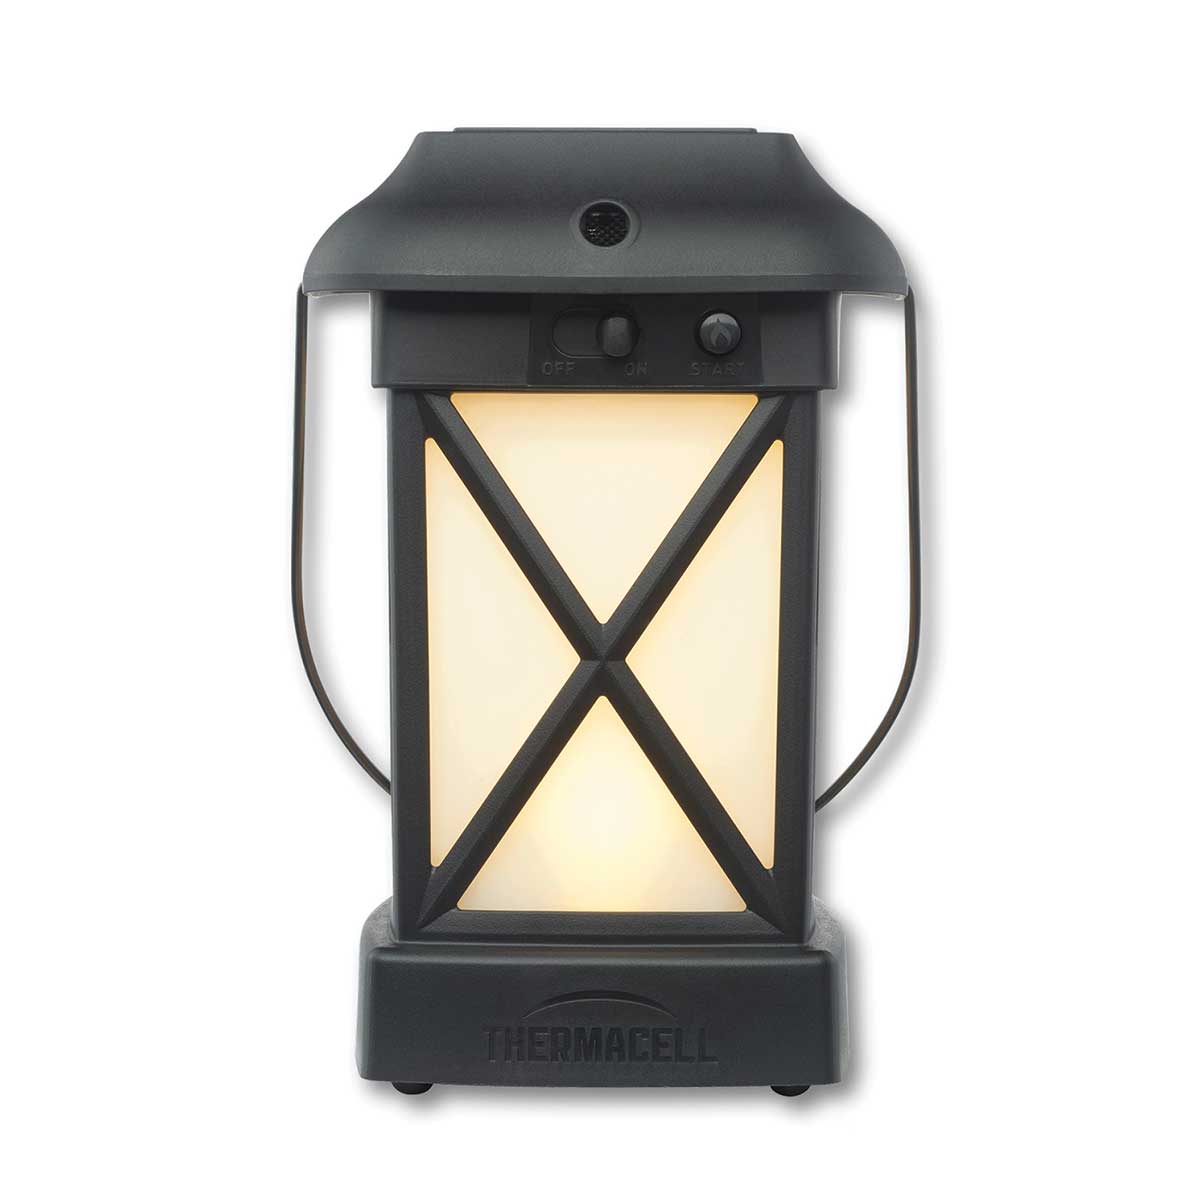 Thermacell Patio Shield Mosquito Repeller Lantern XL